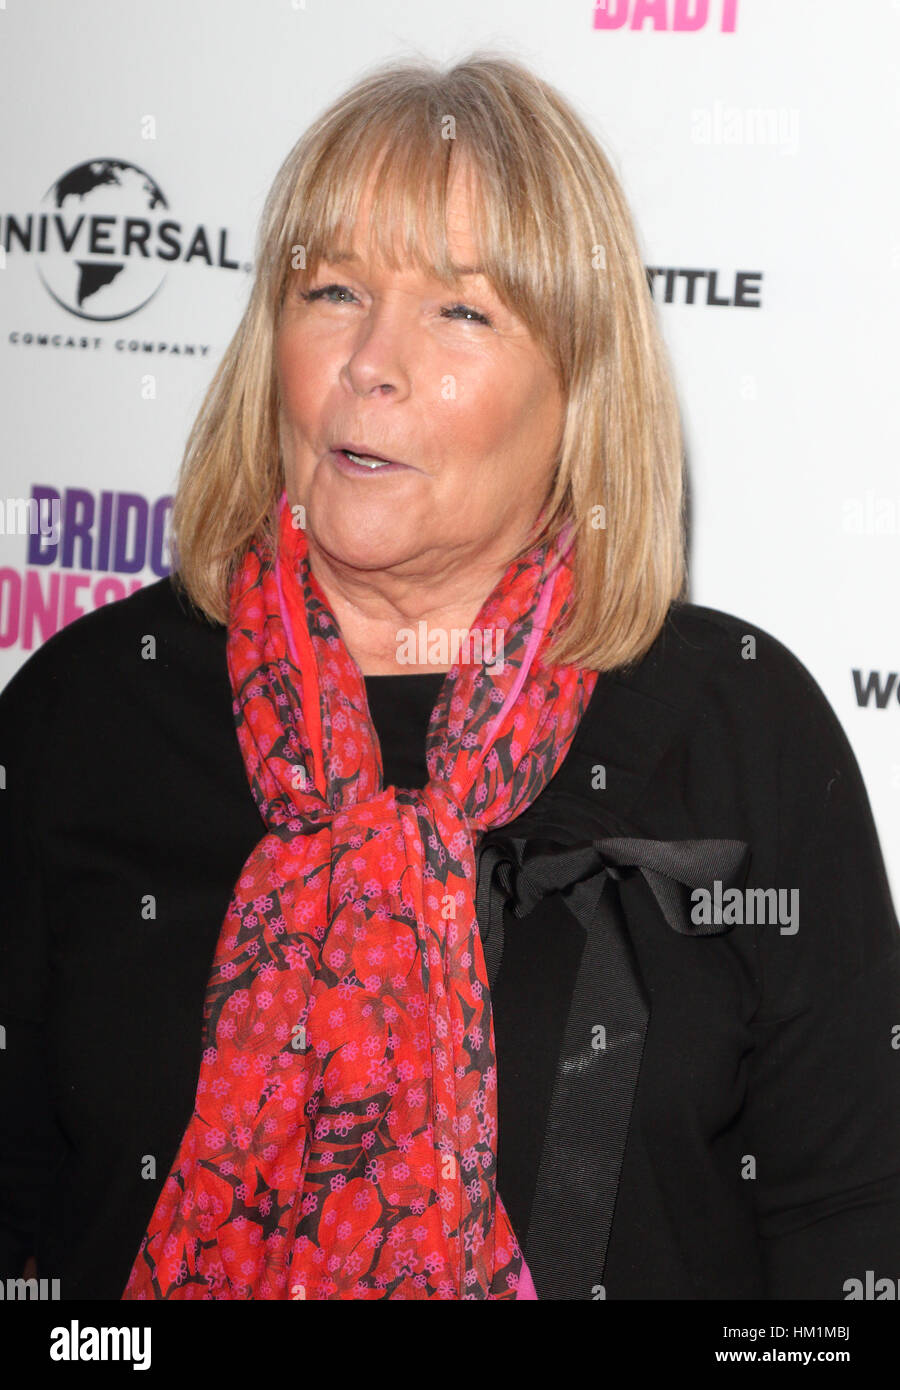 London, UK. 31st Jan, 2017. Linda Robson at the Bridget Jones Baby DVD Launch and Special Screening at the Charlotte Street Hotel, London.    Credit: KEITH MAYHEW/Alamy Live News Stock Photo